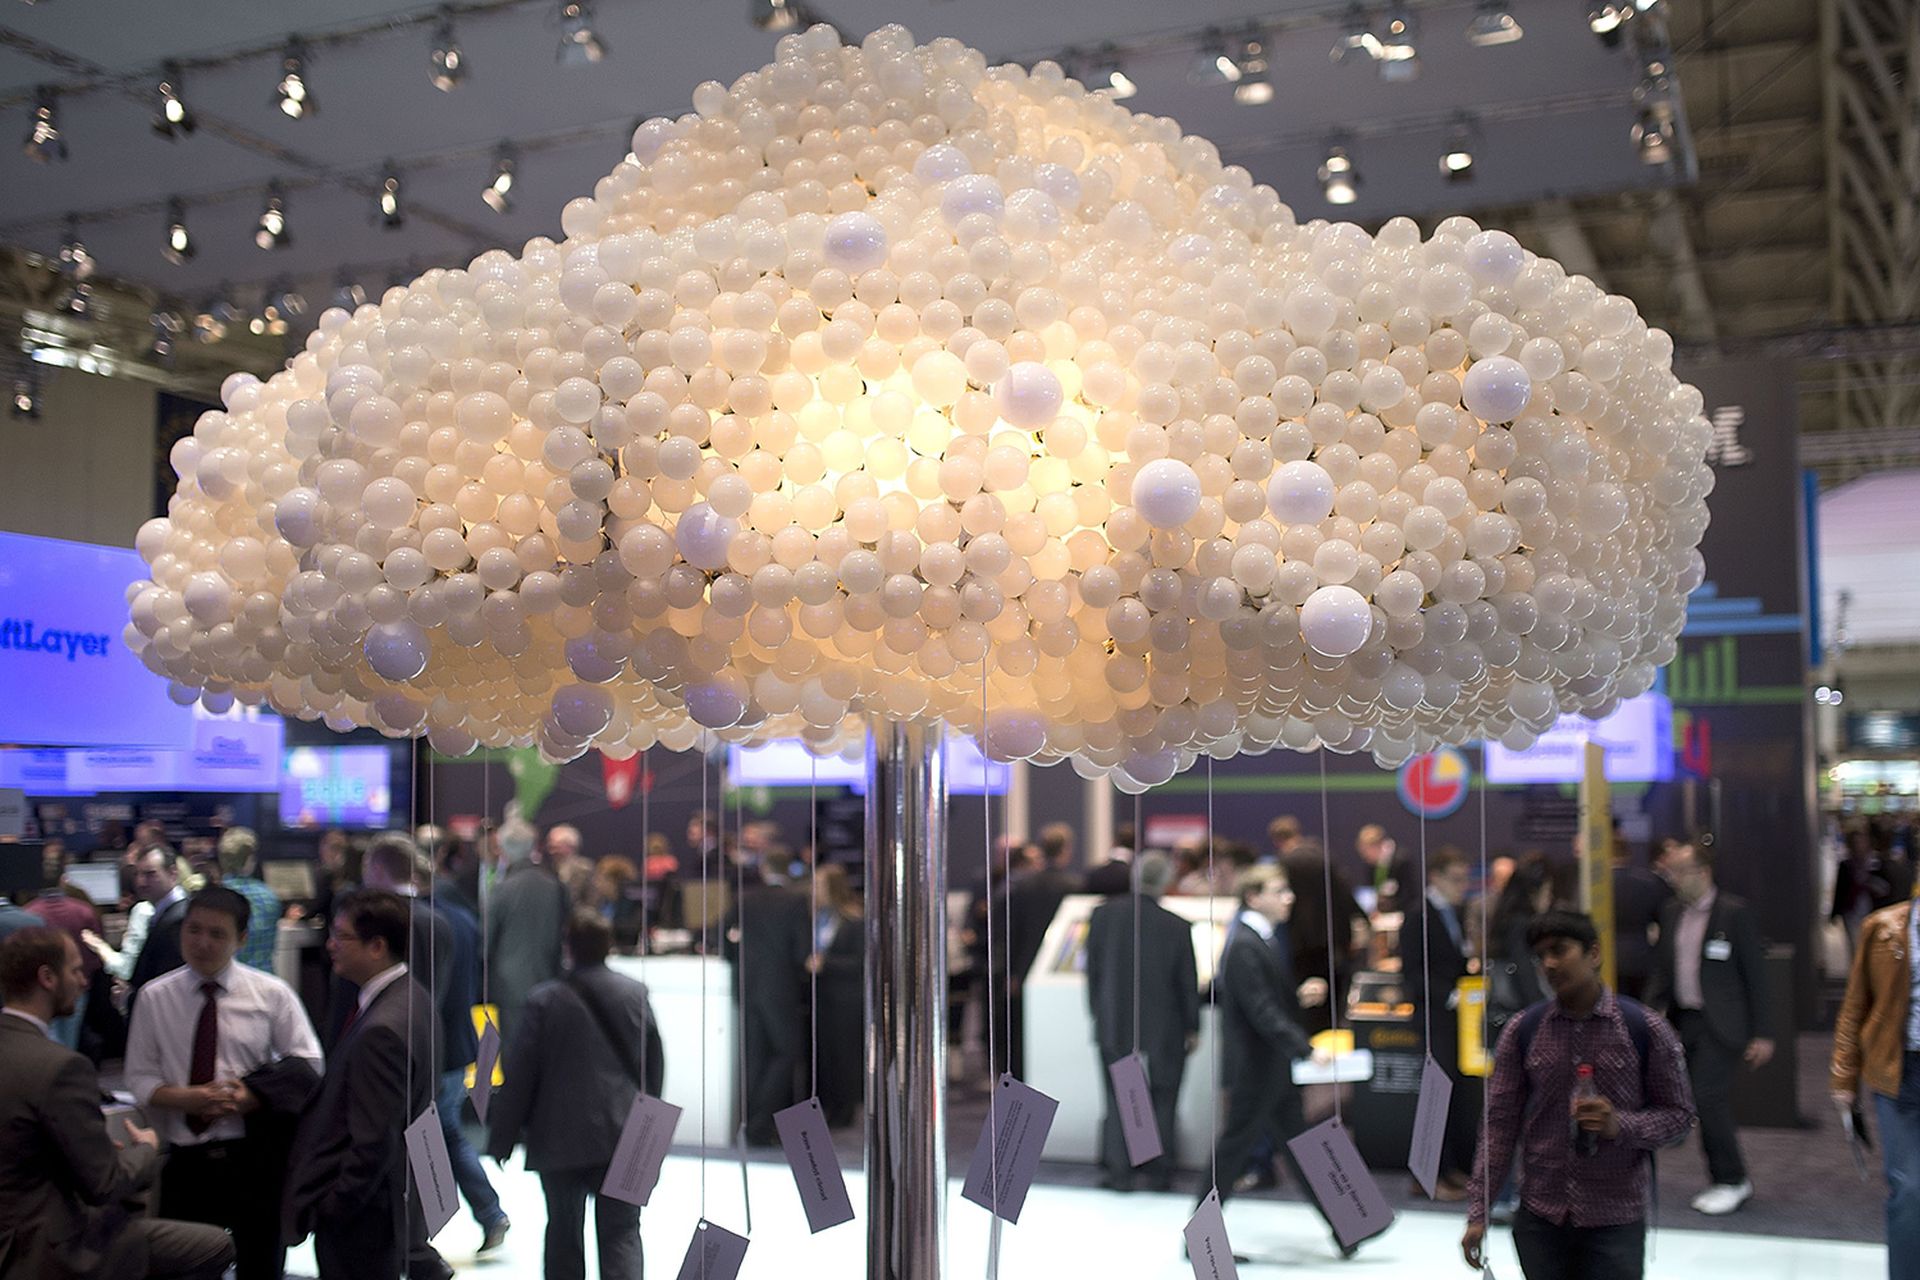 Threat actors turn to old techniques to create disruption, including living-off-the-cloud. Pictured: A symbolic data cloud is seen at the 2014 CeBIT technology trade fair on March 10, 2014, in Hanover, Germany. (Photo by Nigel Treblin/Getty Images)